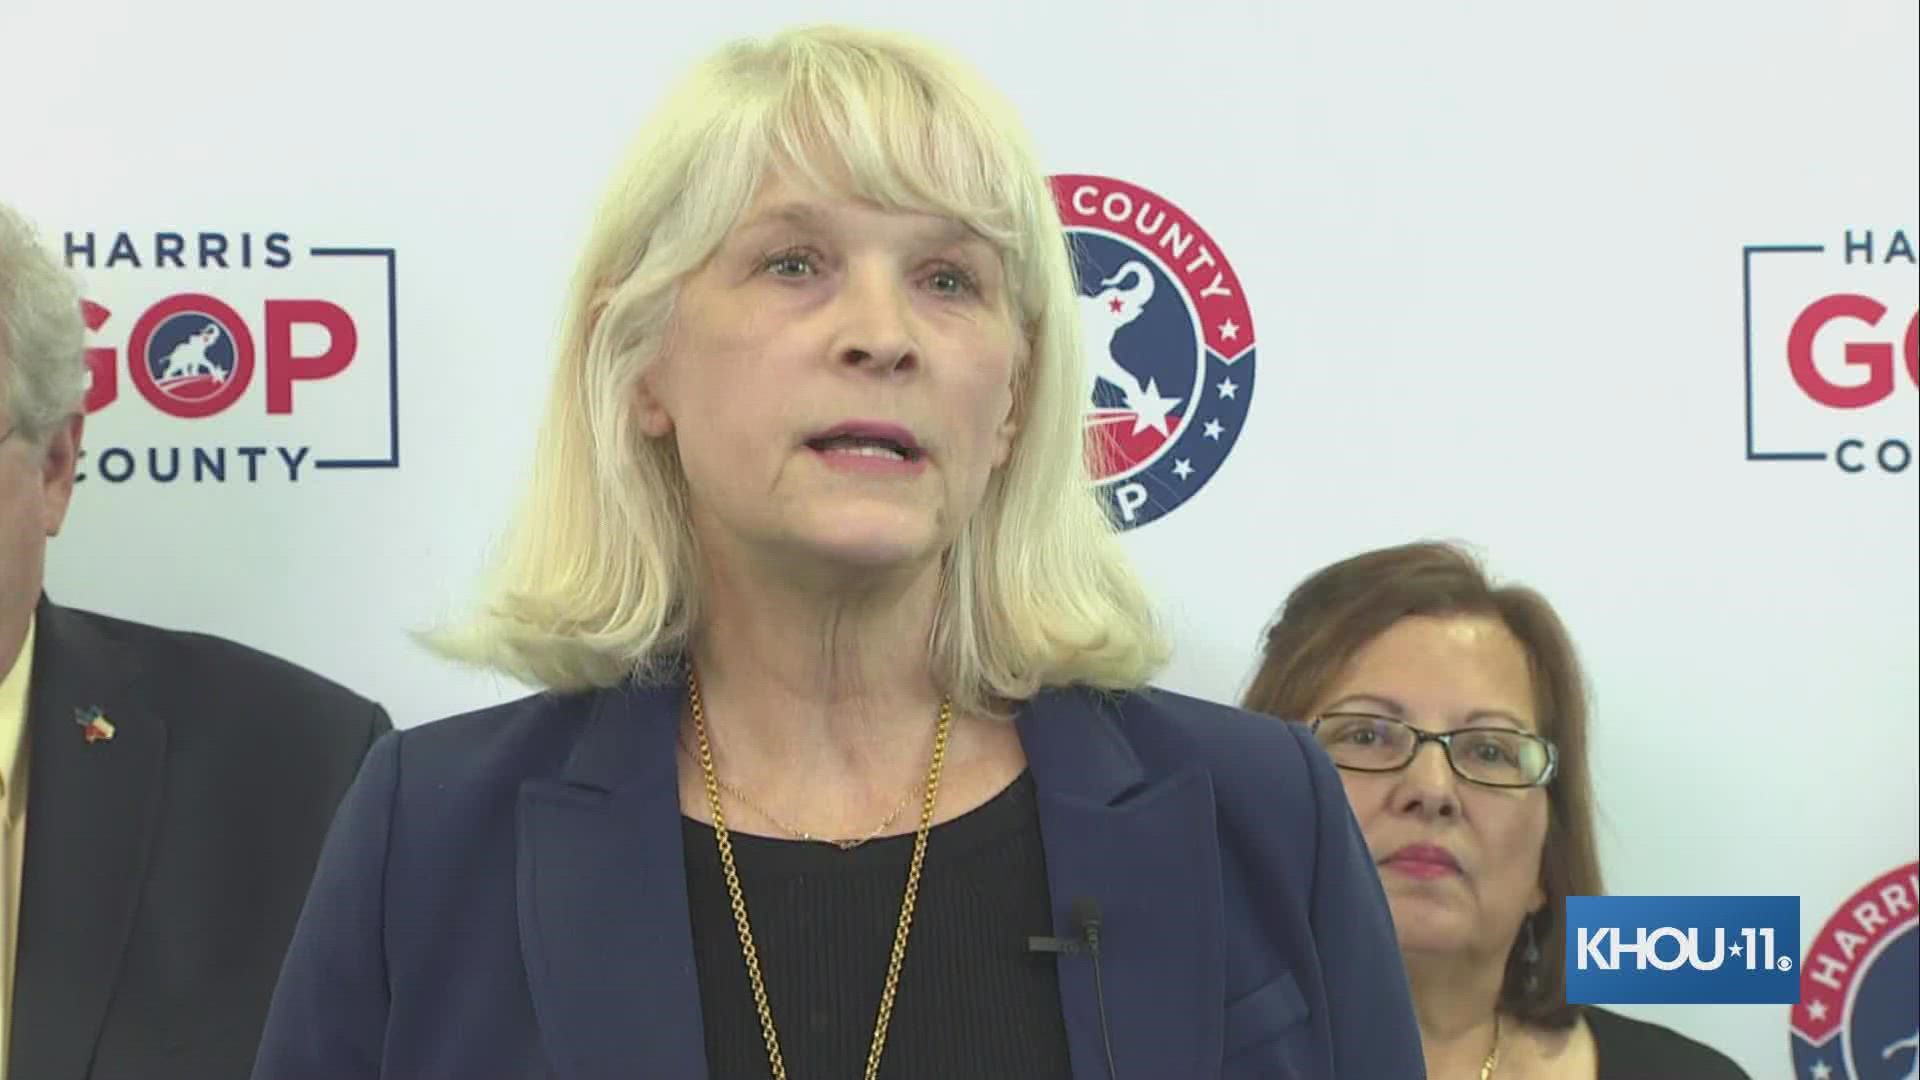 The Harris County GOP is calling for the resignation or firing of Elections Administrator Isabel Longoria following the primary election held on Tuesday.